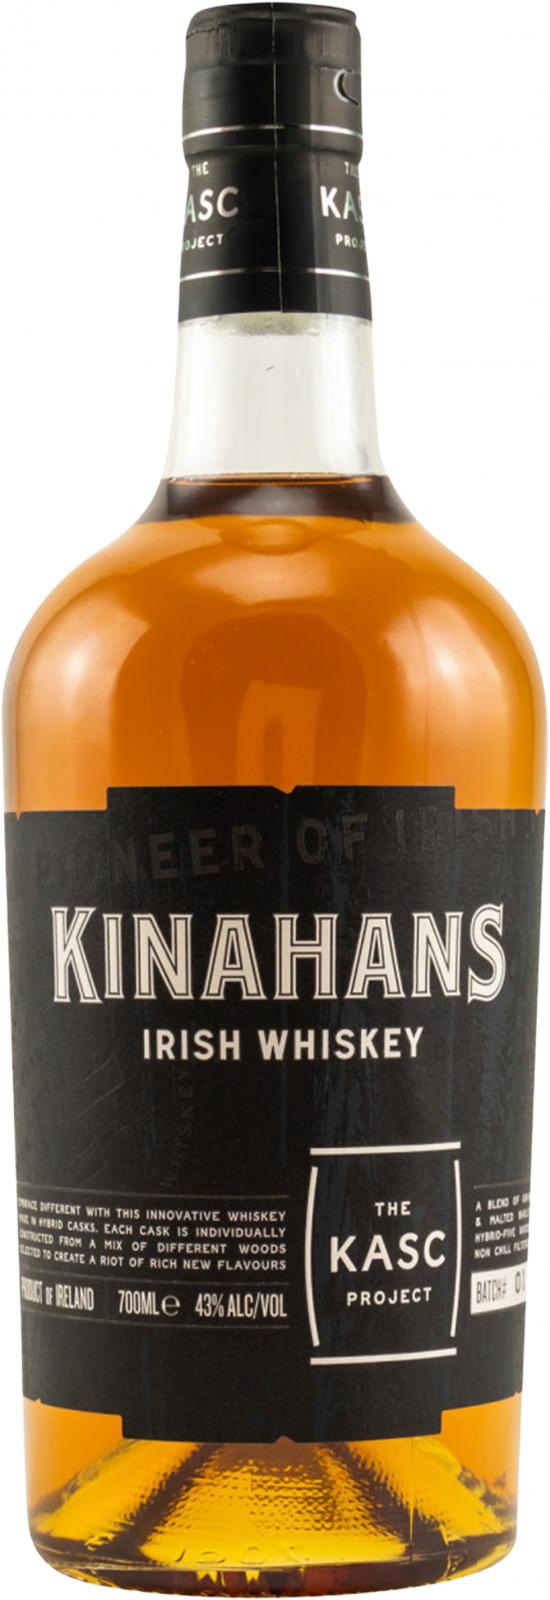 Kinahan\'s The - Ratings reviews and - Project Whiskybase Kasc